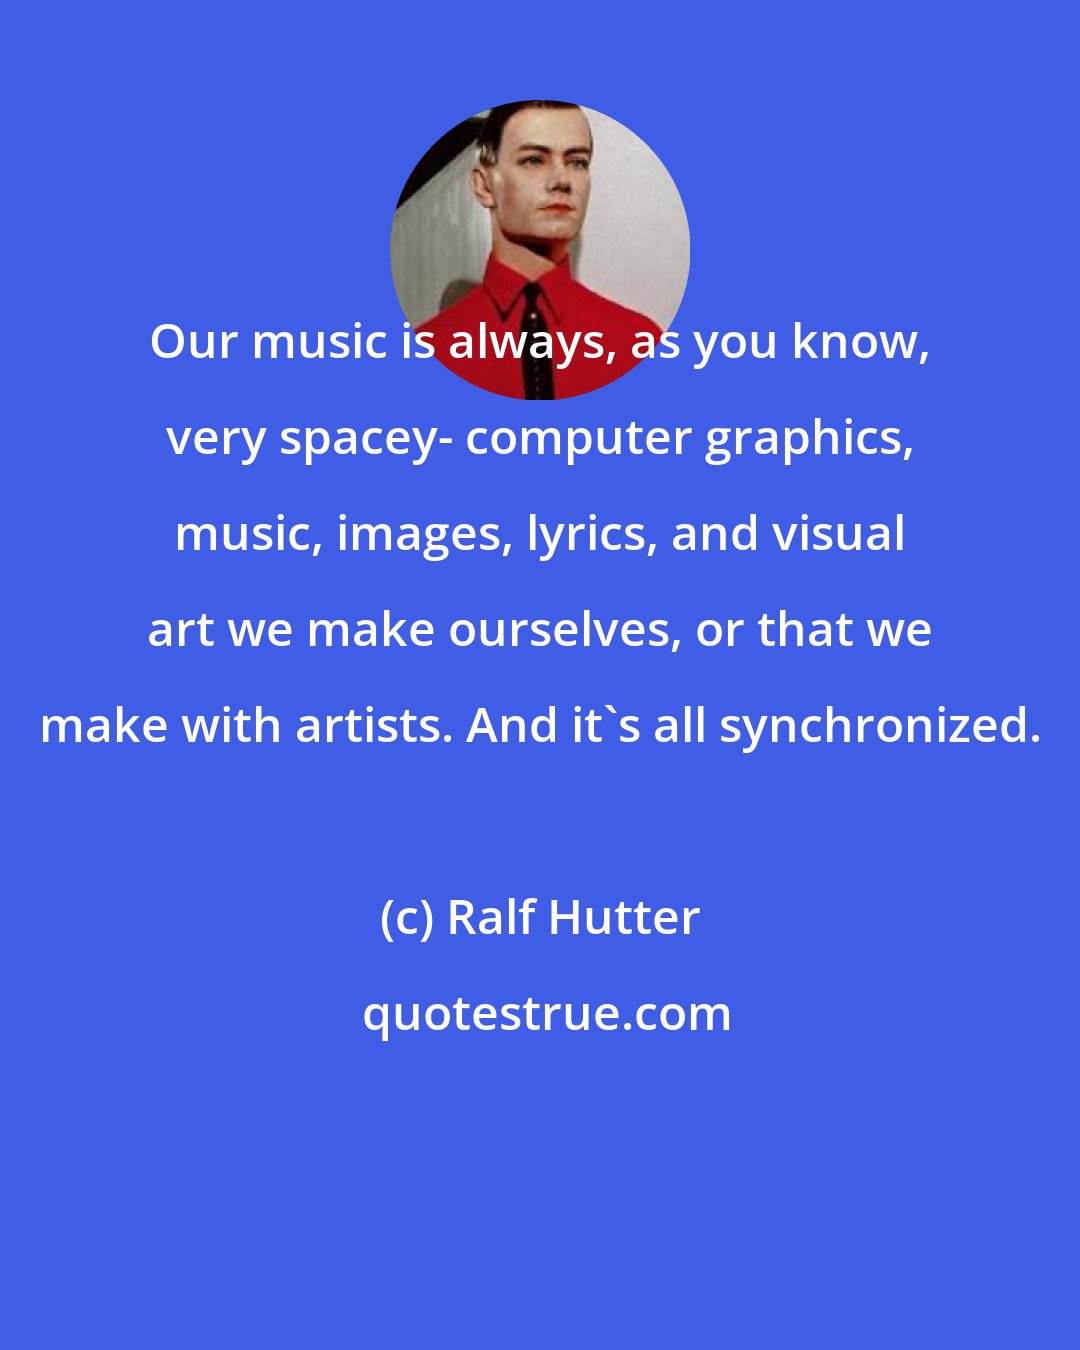 Ralf Hutter: Our music is always, as you know, very spacey- computer graphics, music, images, lyrics, and visual art we make ourselves, or that we make with artists. And it's all synchronized.